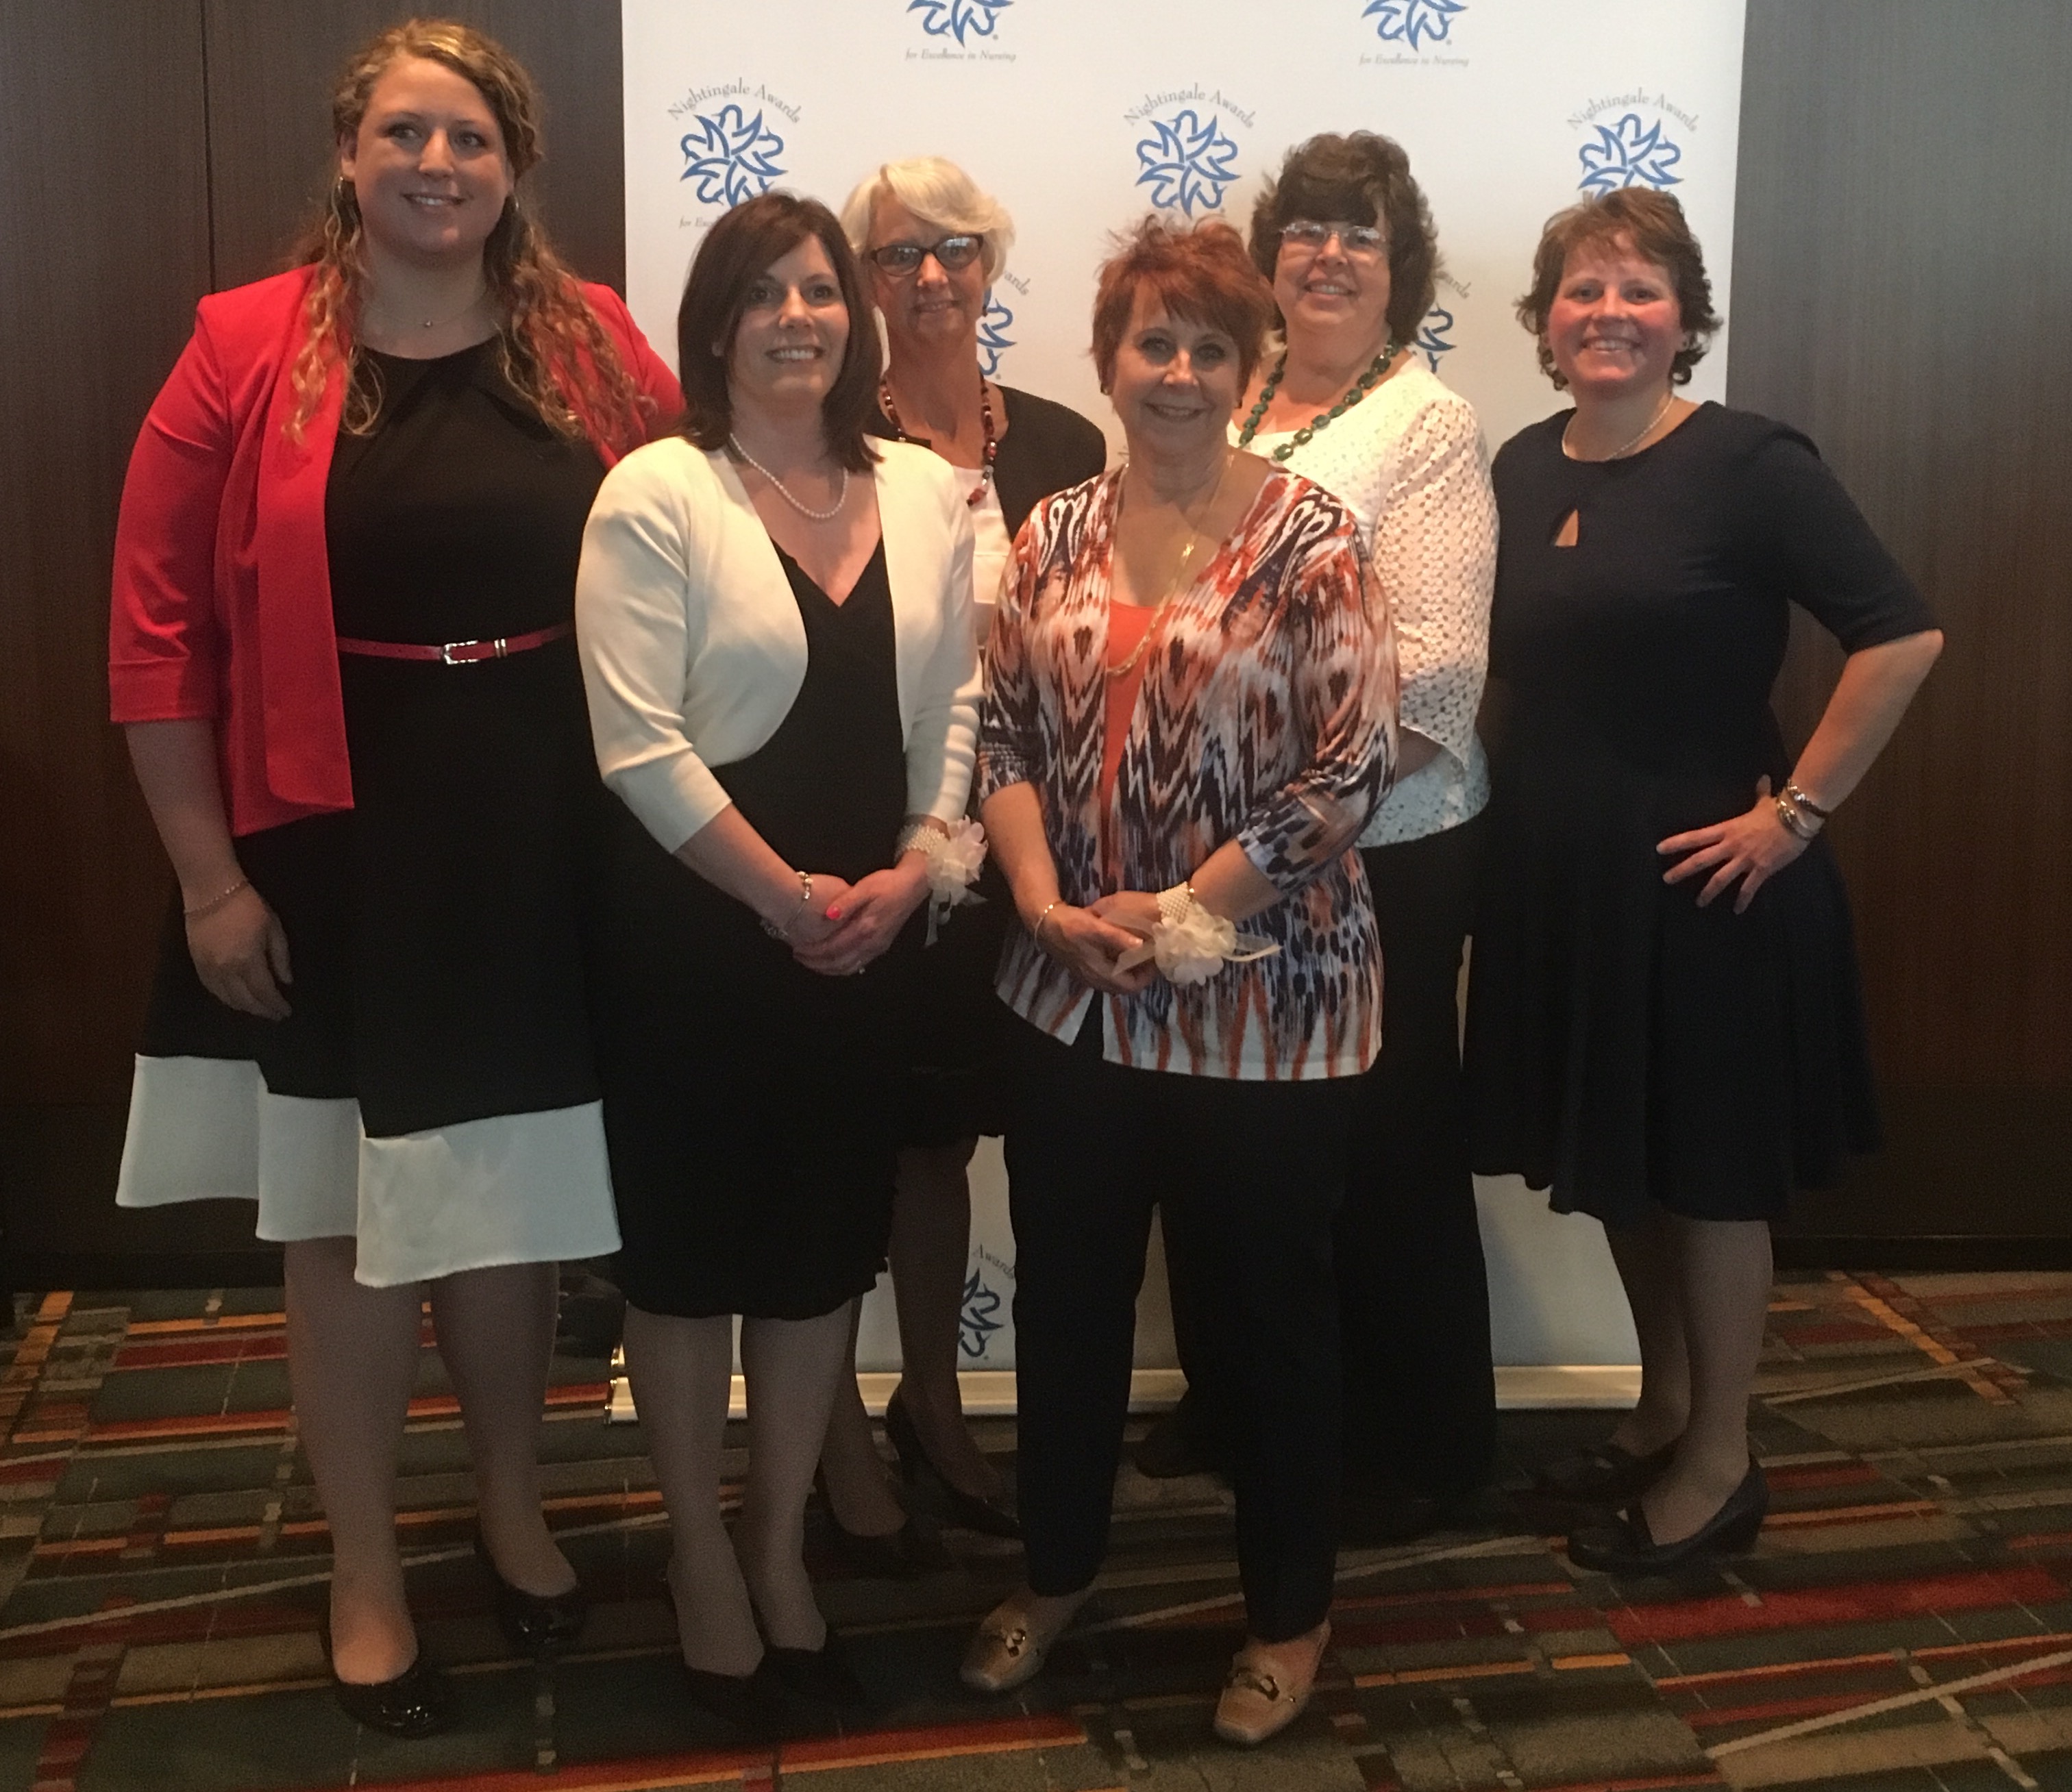 UConn Health Nightingale Nurses at the annual awards ceremony May 5 at the Connecticut Convention Center. From left, Jennifer Sposito, Lisa Gentile, Dawn Smith, Arlene Morin, JoAnne Donaldson Blythe, and Anne Niziolek.